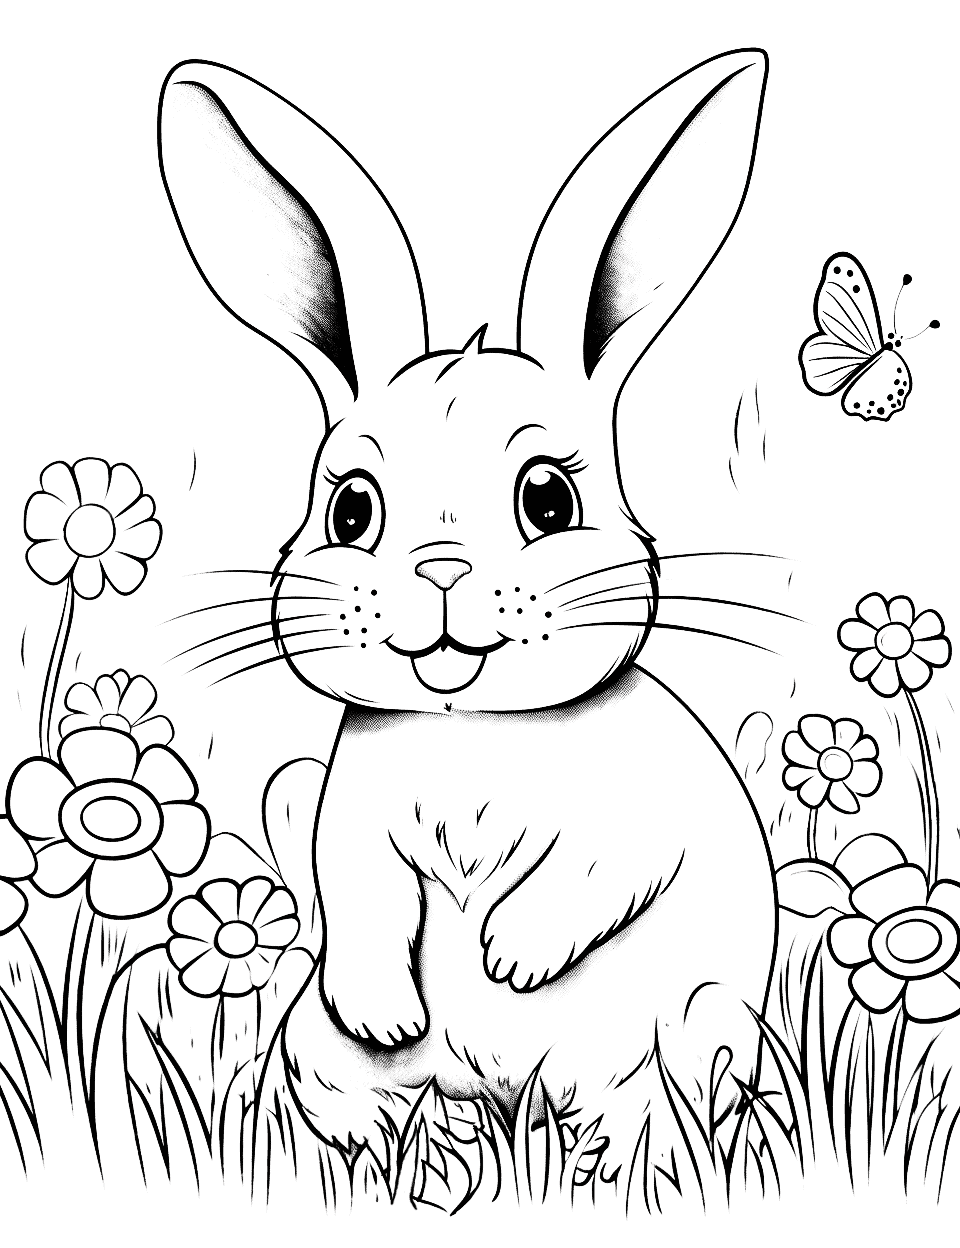 Bunny in a Meadow Easter Coloring Page - A bunny enjoying the springtime in a meadow filled with blooming flowers and butterflies.